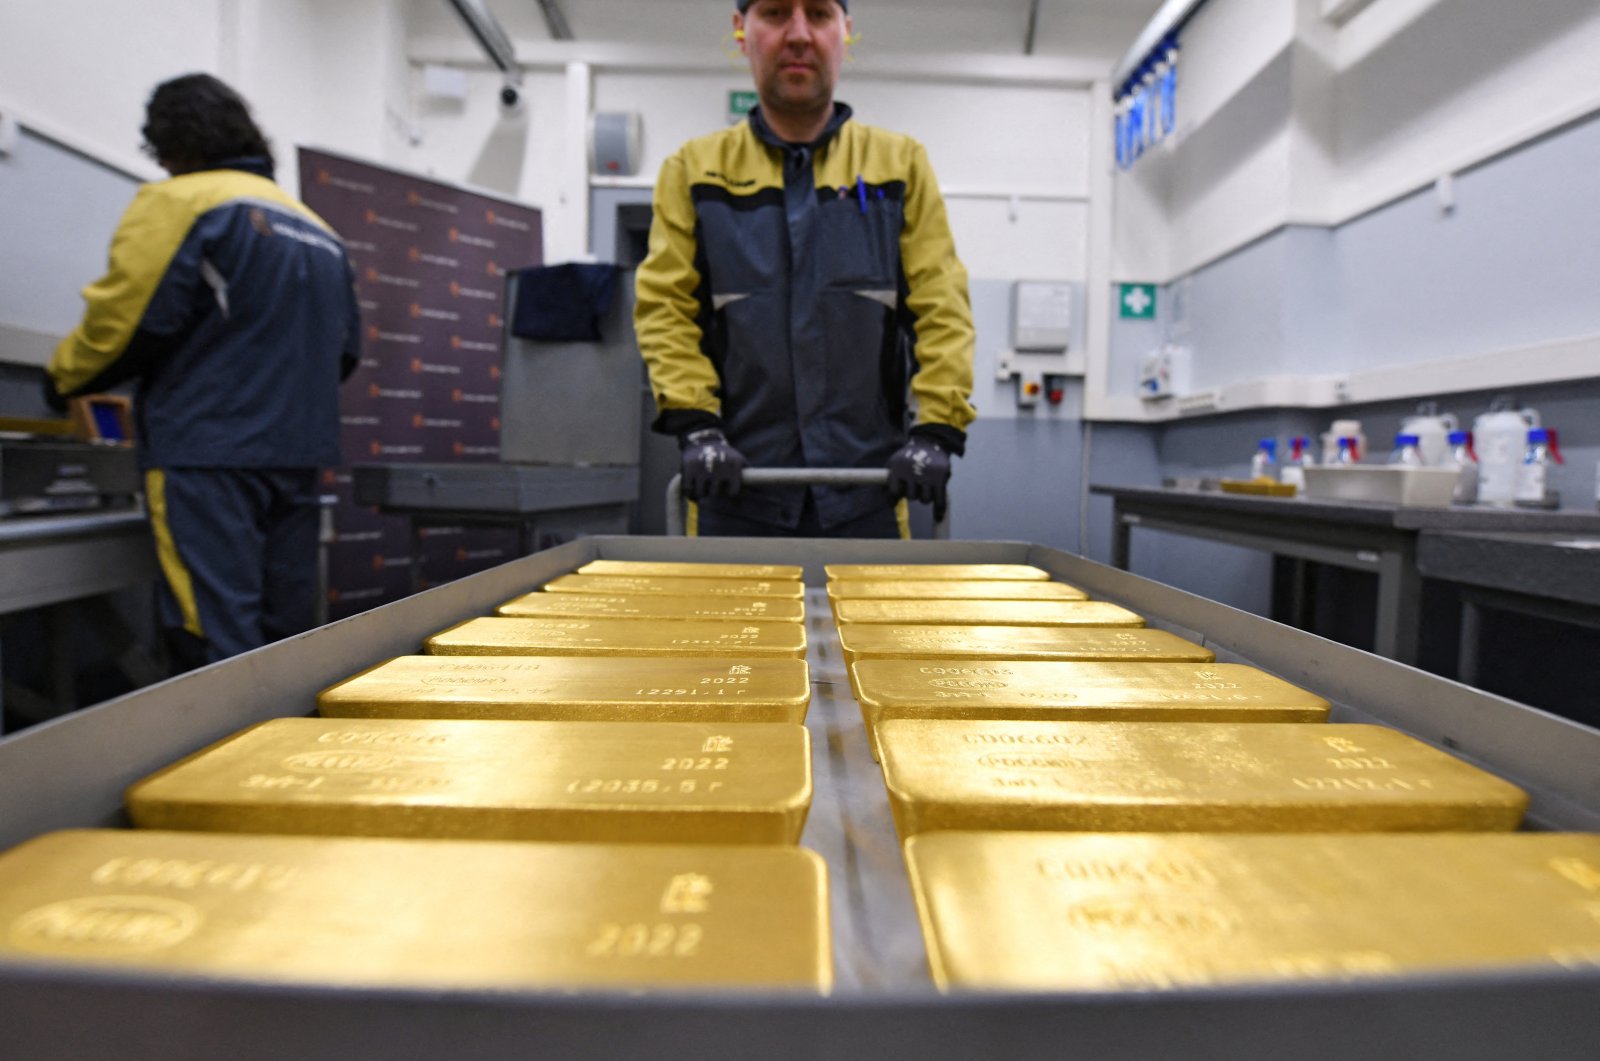 Marked ingots of 99.99% pure gold are placed in a cart at the Krastsvetmet non-ferrous metals plant in the Siberian city of Krasnoyarsk, Russia, March 10, 2022. (Reuters Photo)